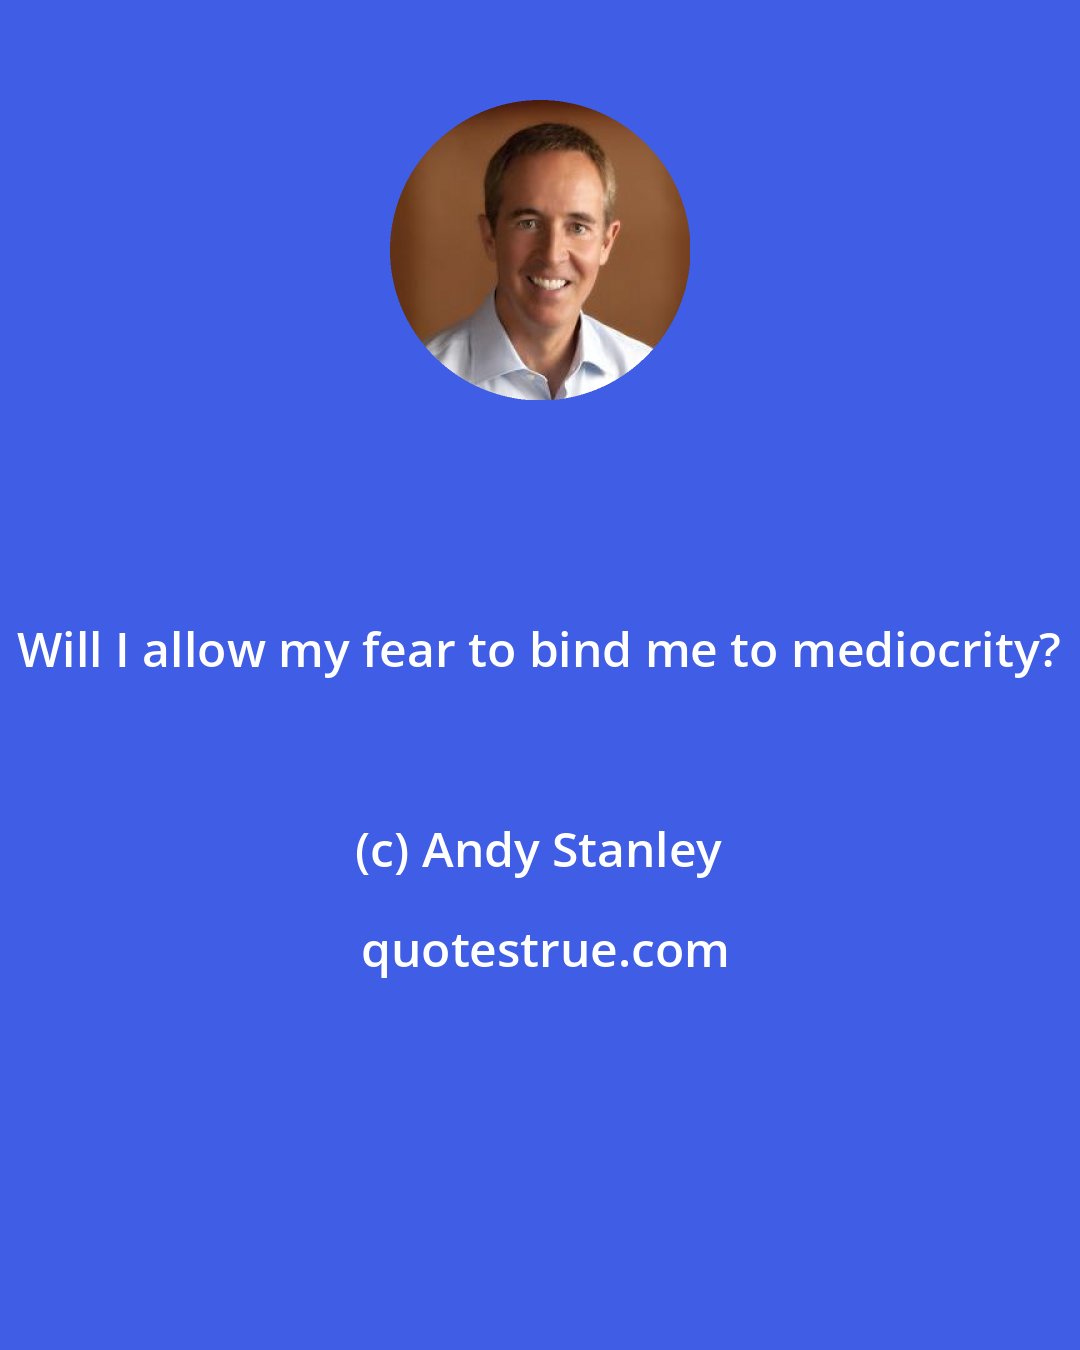 Andy Stanley: Will I allow my fear to bind me to mediocrity?